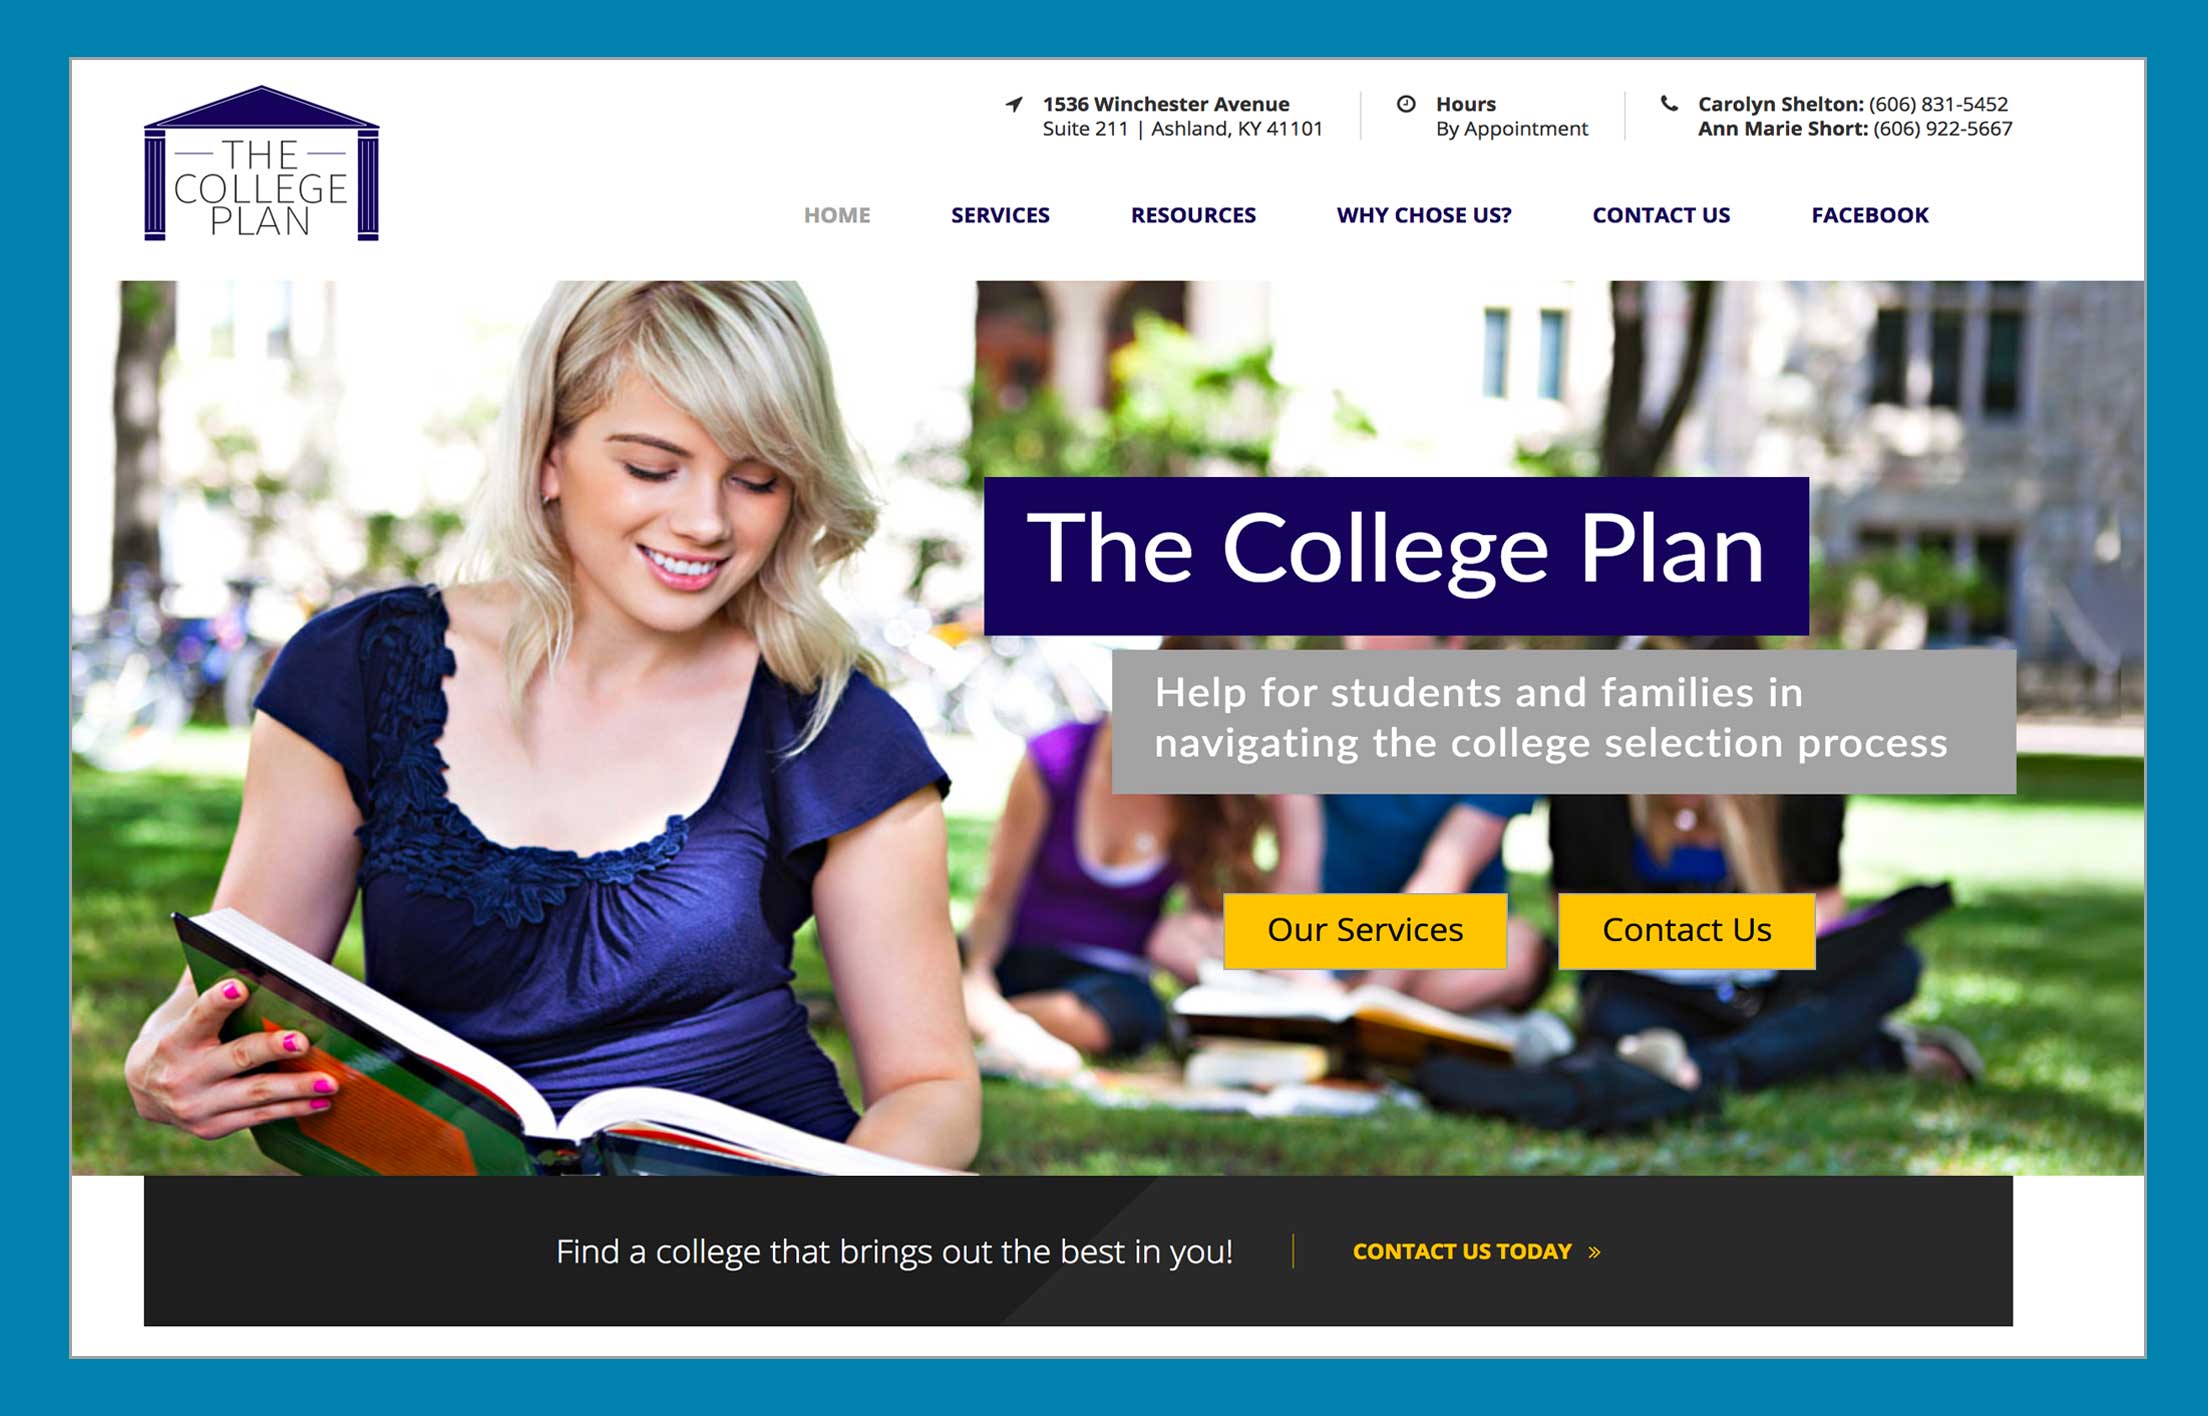 The College Plan